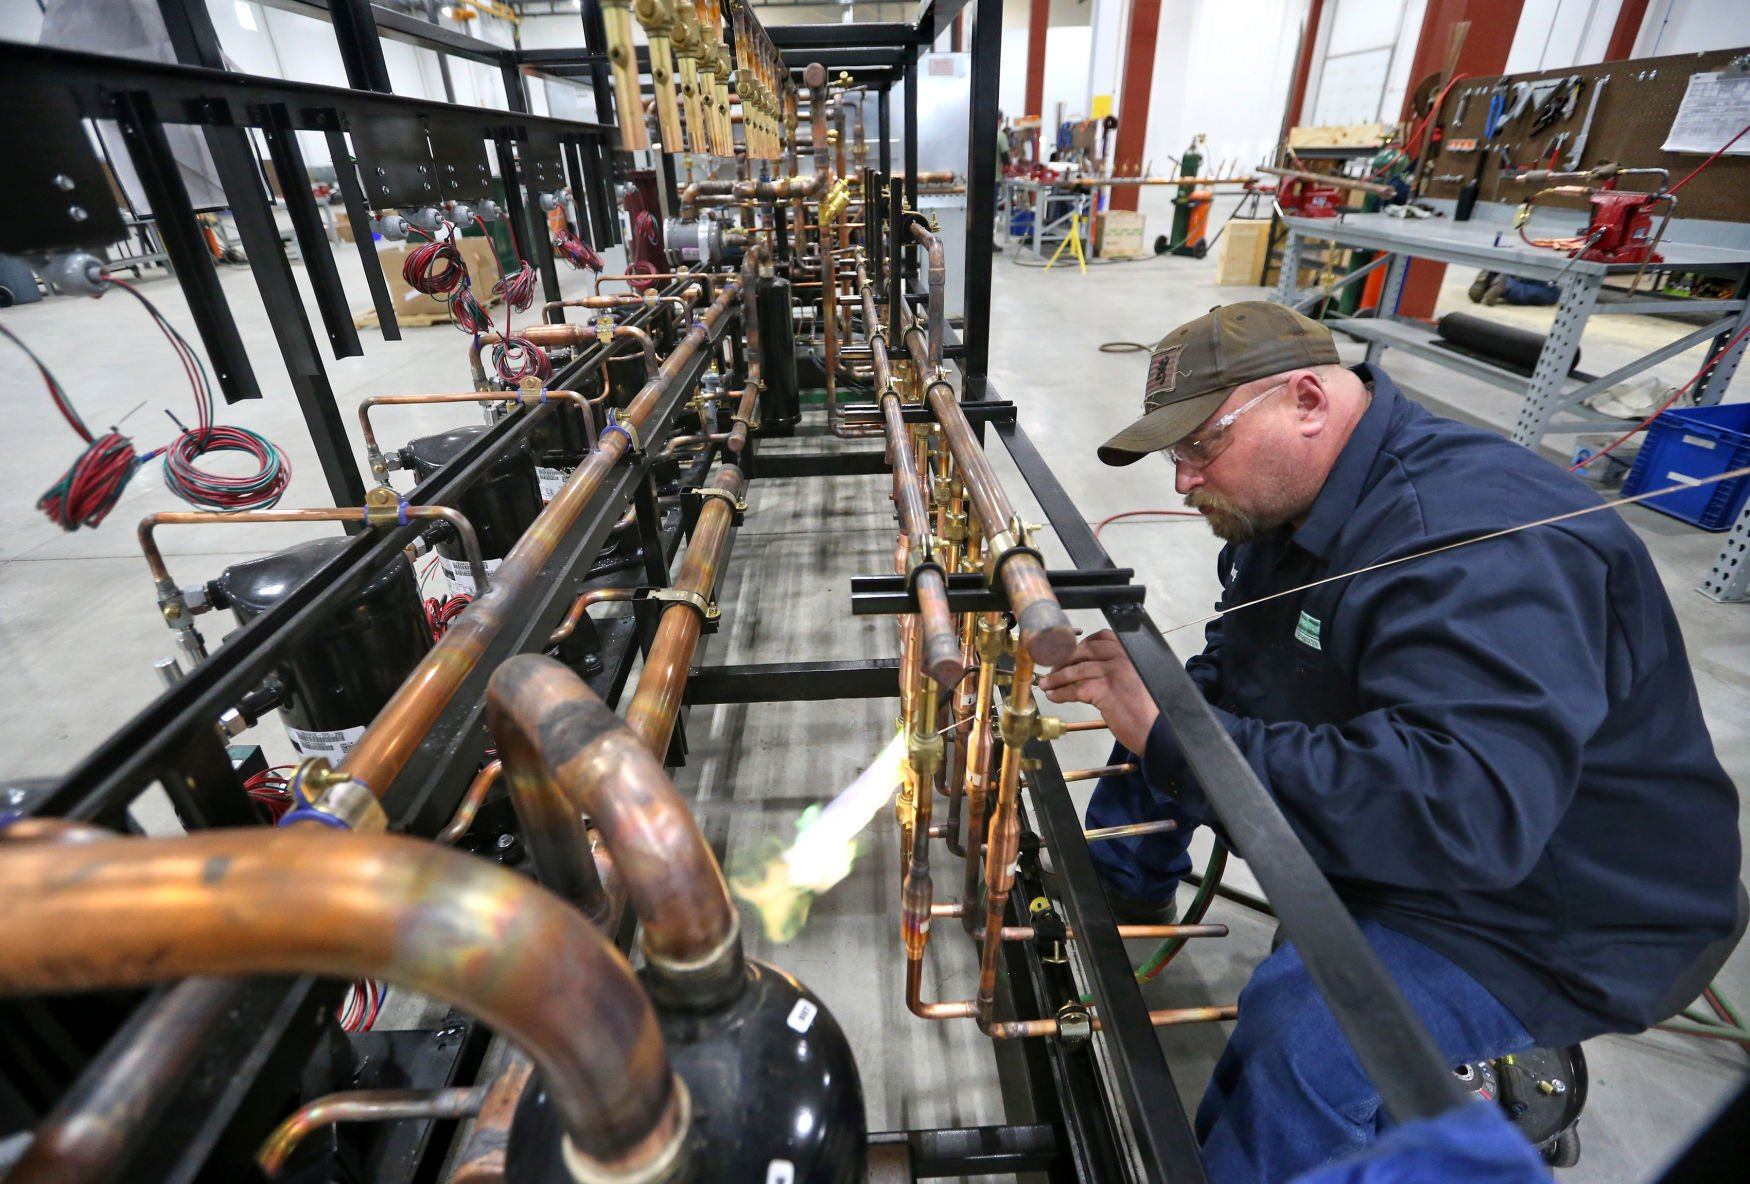 Doug Knight works on brazing a pipe on an industrial refrigeration unit at Zero Zone in Dyersville, Iowa, on Thursday.    PHOTO CREDIT: JESSICA REILLY